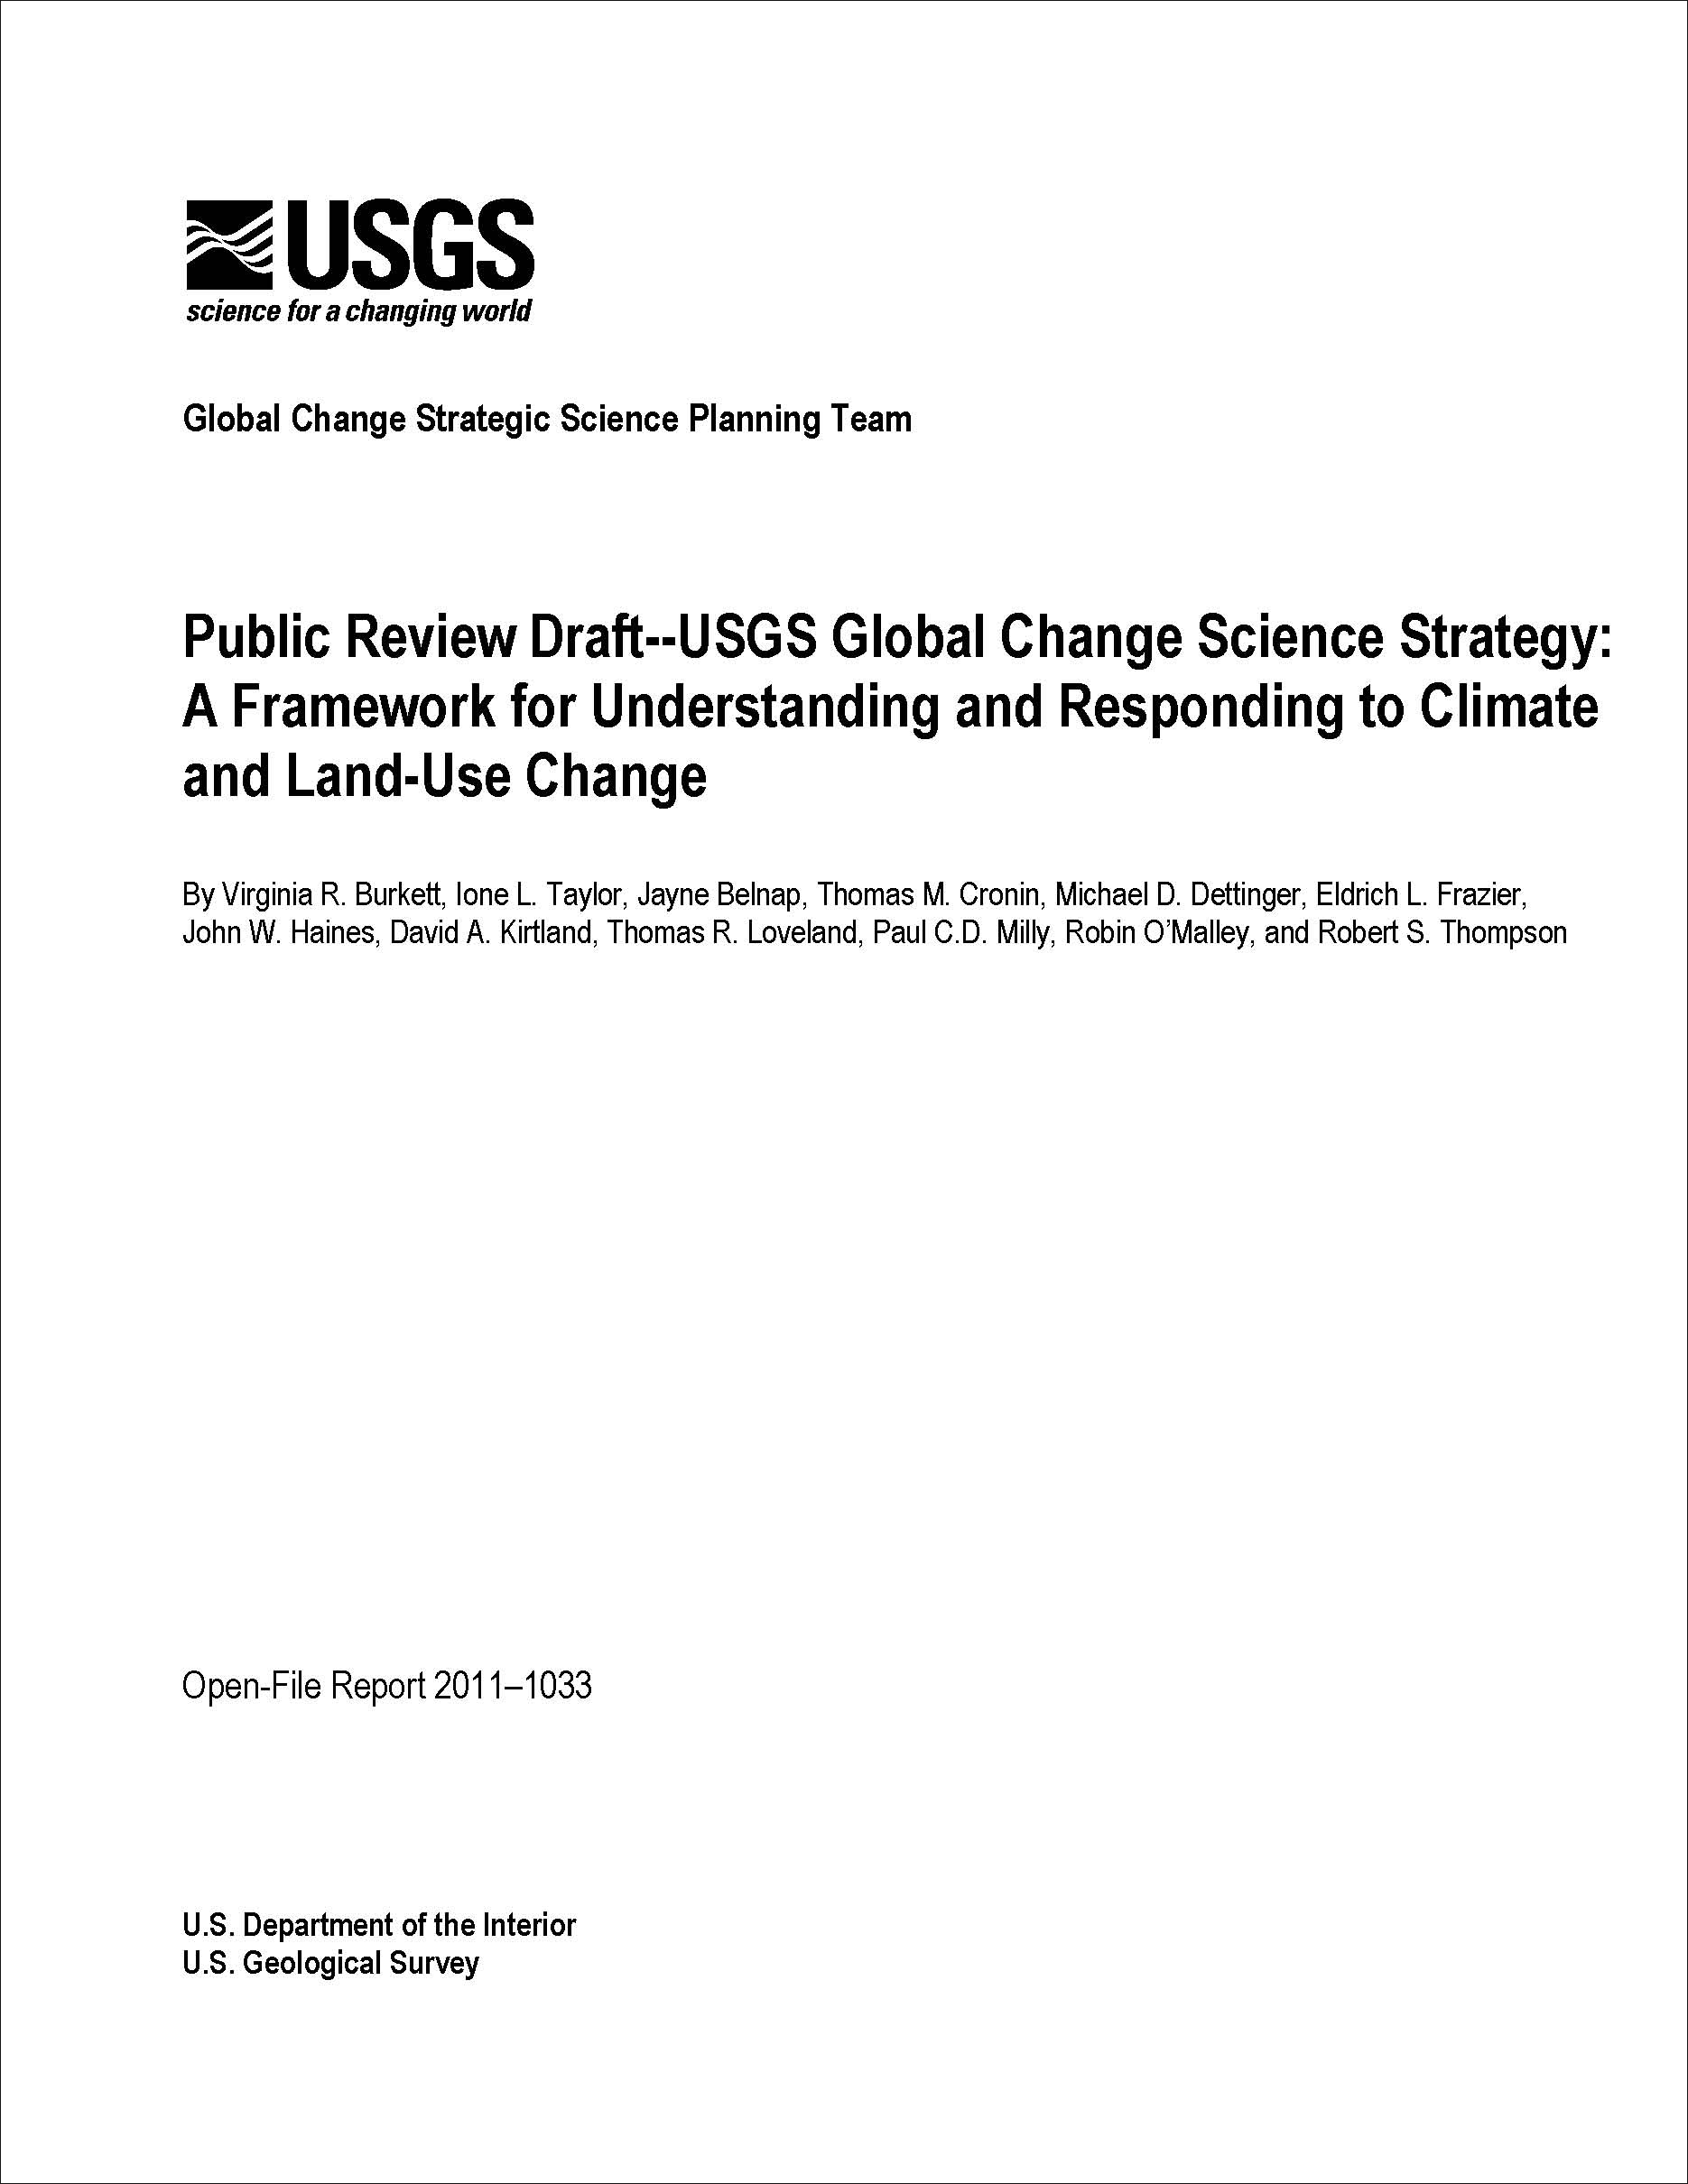 Thumbnail of front cover and link to report - USGS Global Change Science Strategy: A Framework for Understanding and Responding to Climate and Land-Use Change (2.28 MB)